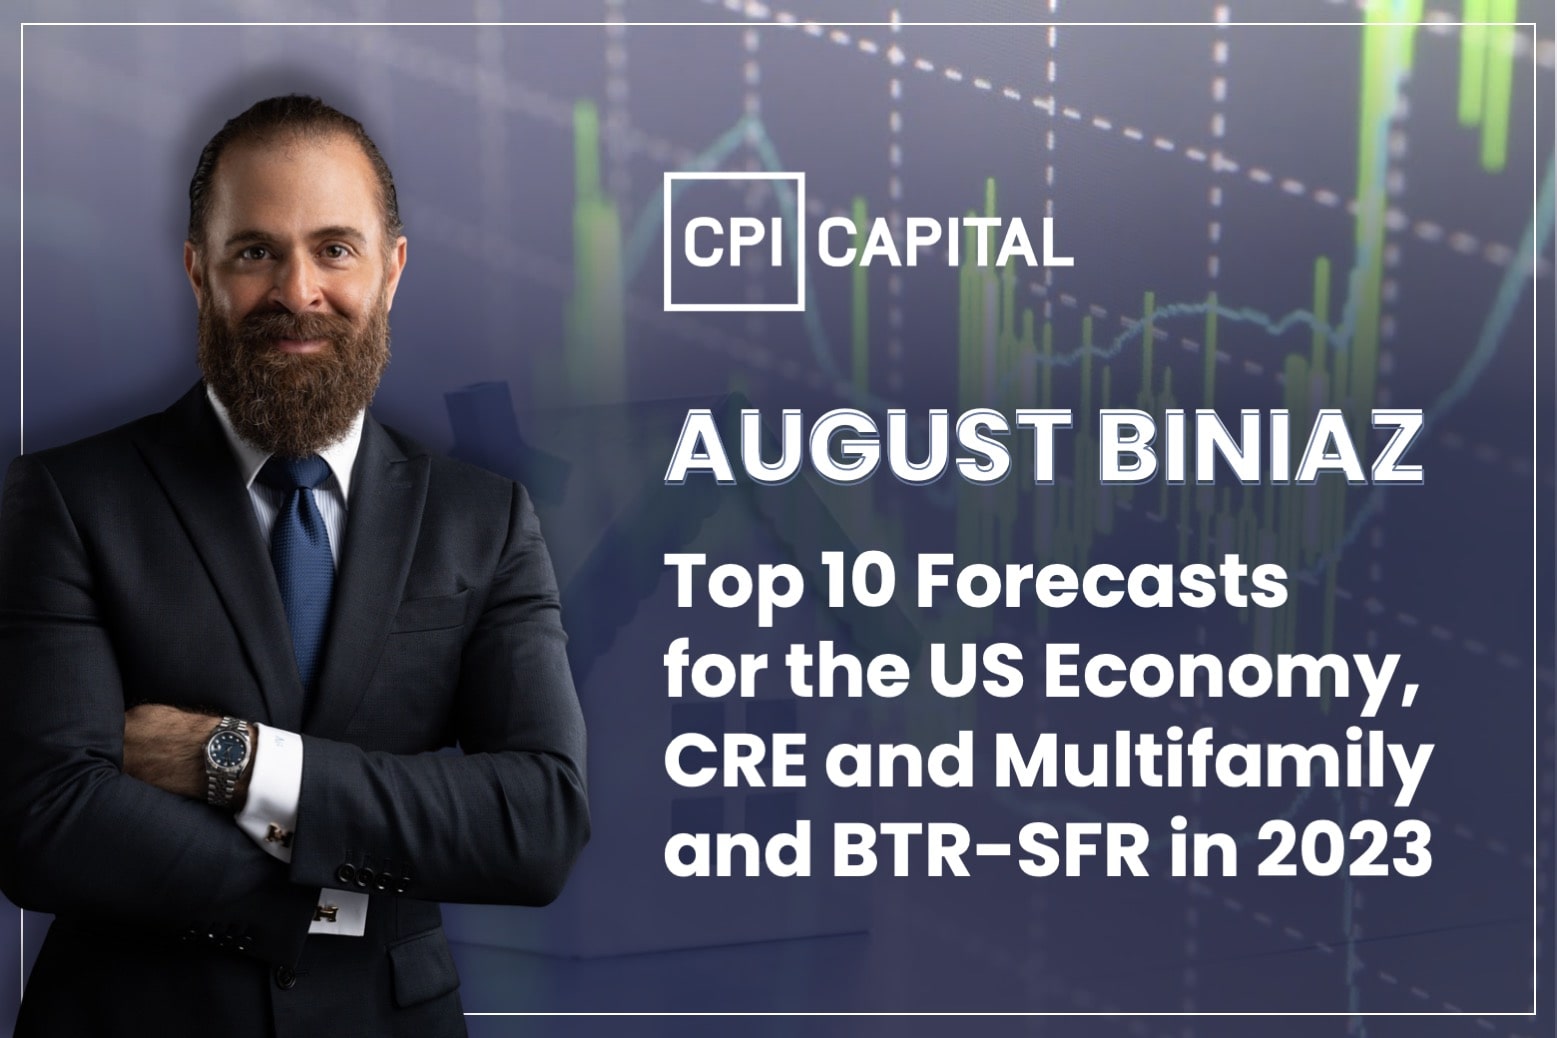 August Biniaz’s Top 10 Forecasts for the US Economy, CRE and Multifamily and BTR-SFR in 2023